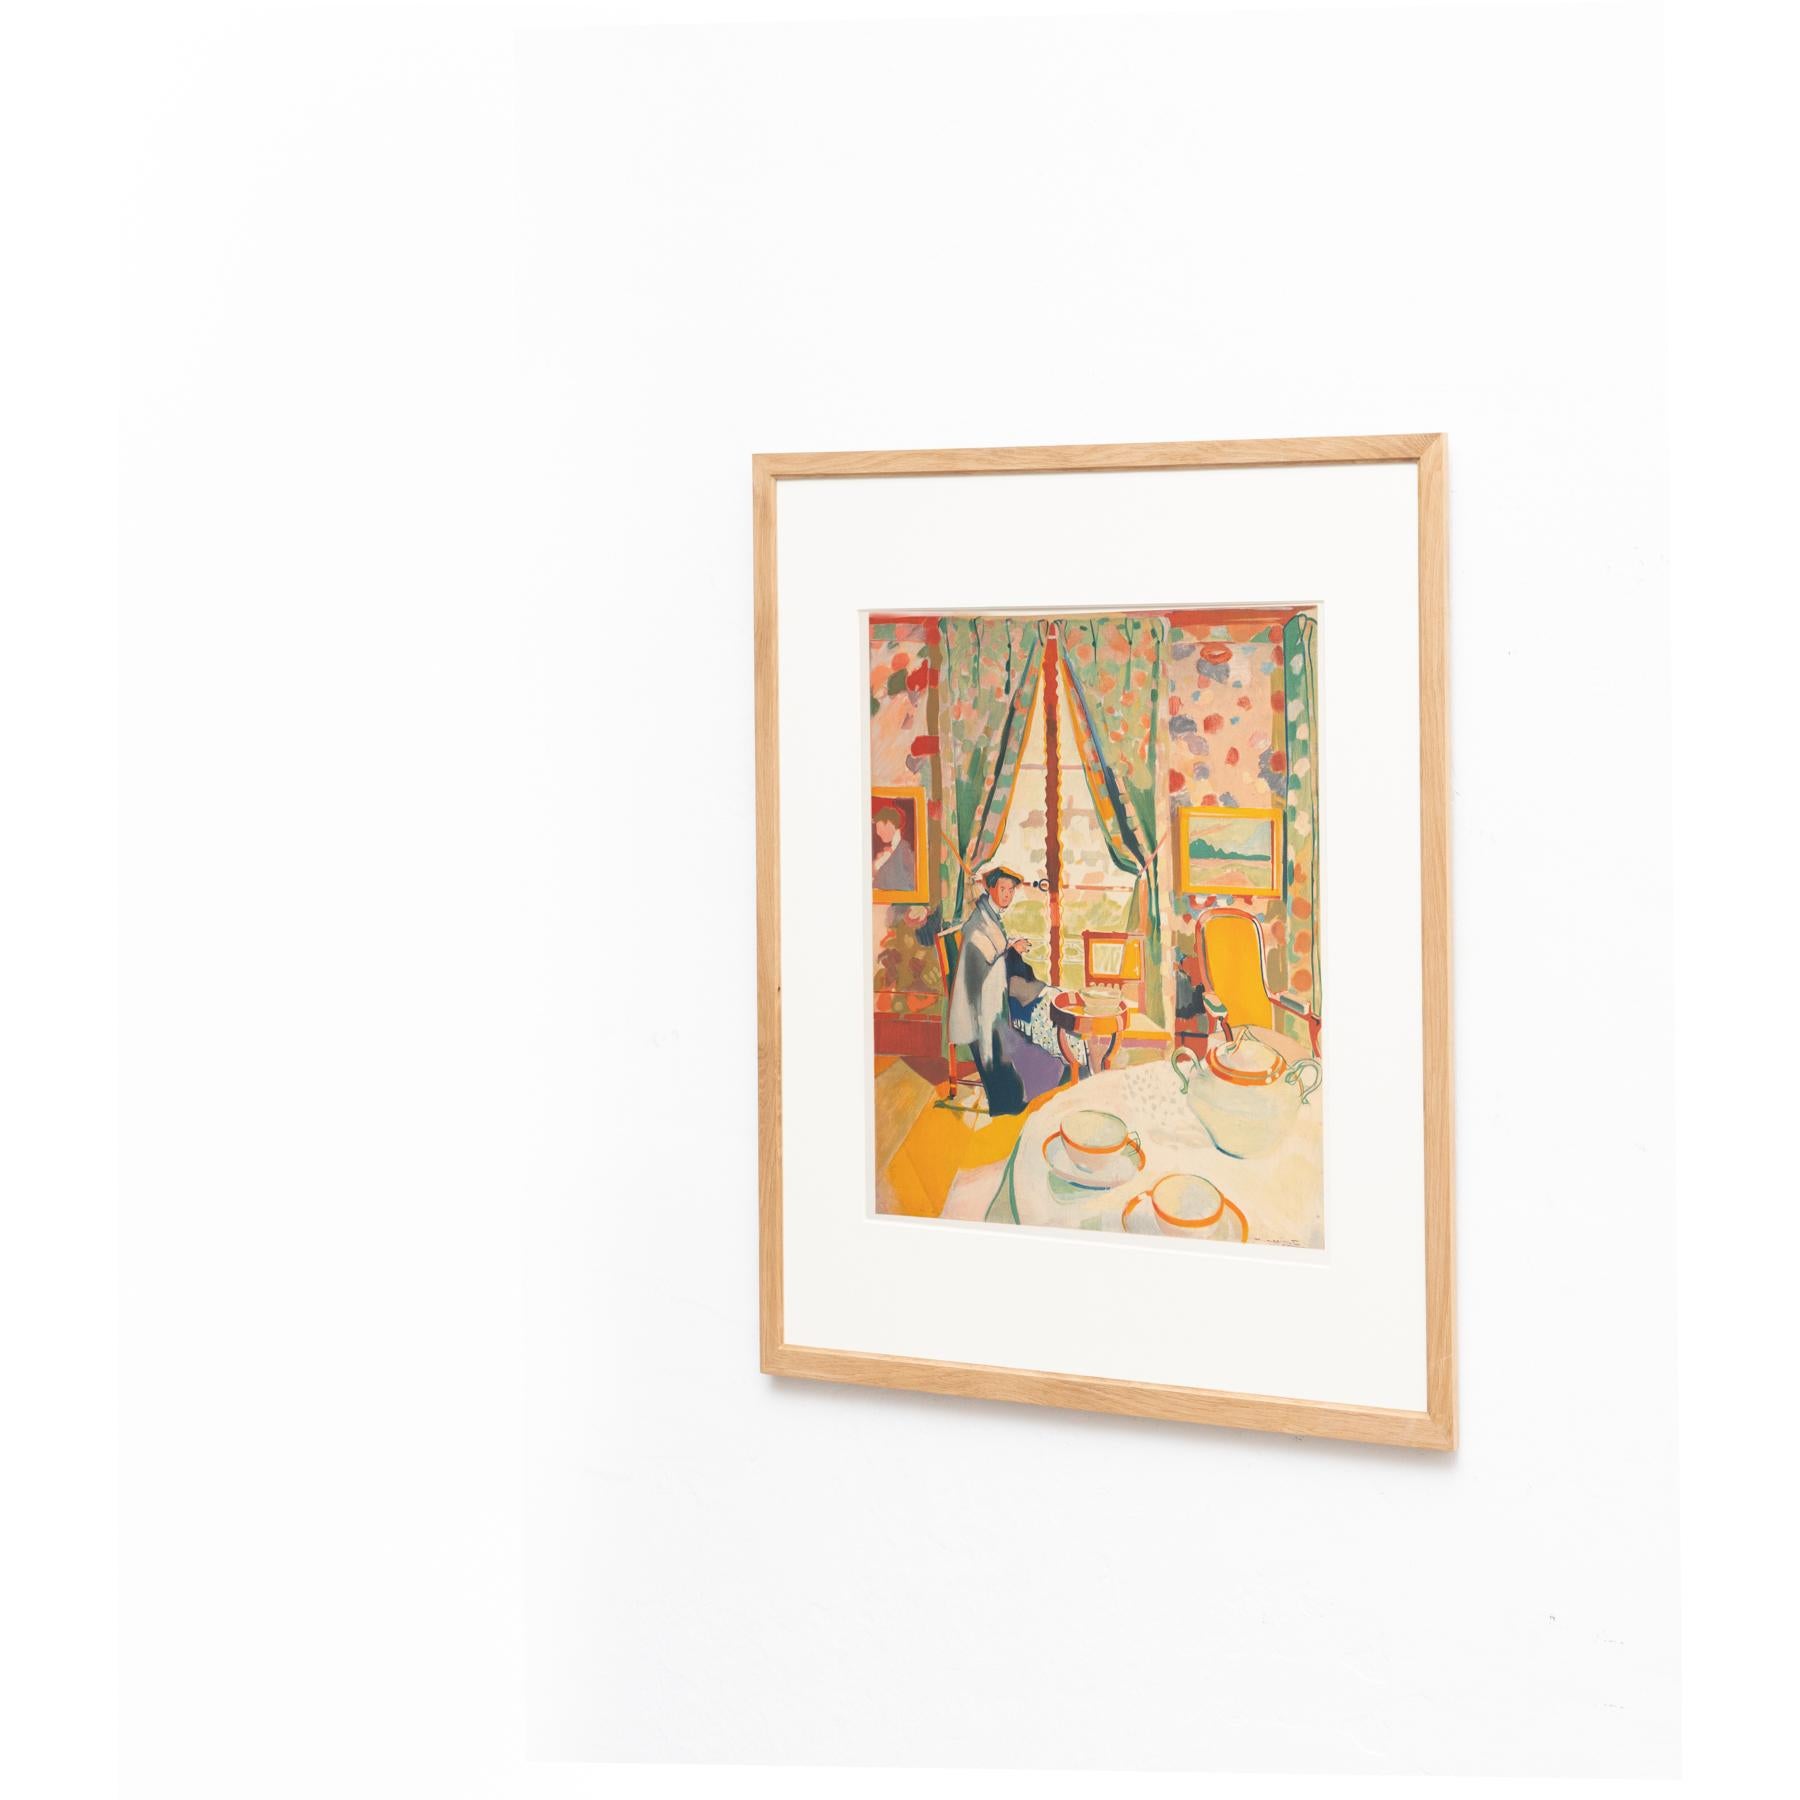 Lithograph 'Intérieur' by Maurice Marinot, circa 1906.

Lithograph printed from an original painting made by the author in France, circa 1906.

Published by Fernand Mourlot in Les Fauves. Paris, circa 1972. 

Framed and signed in the